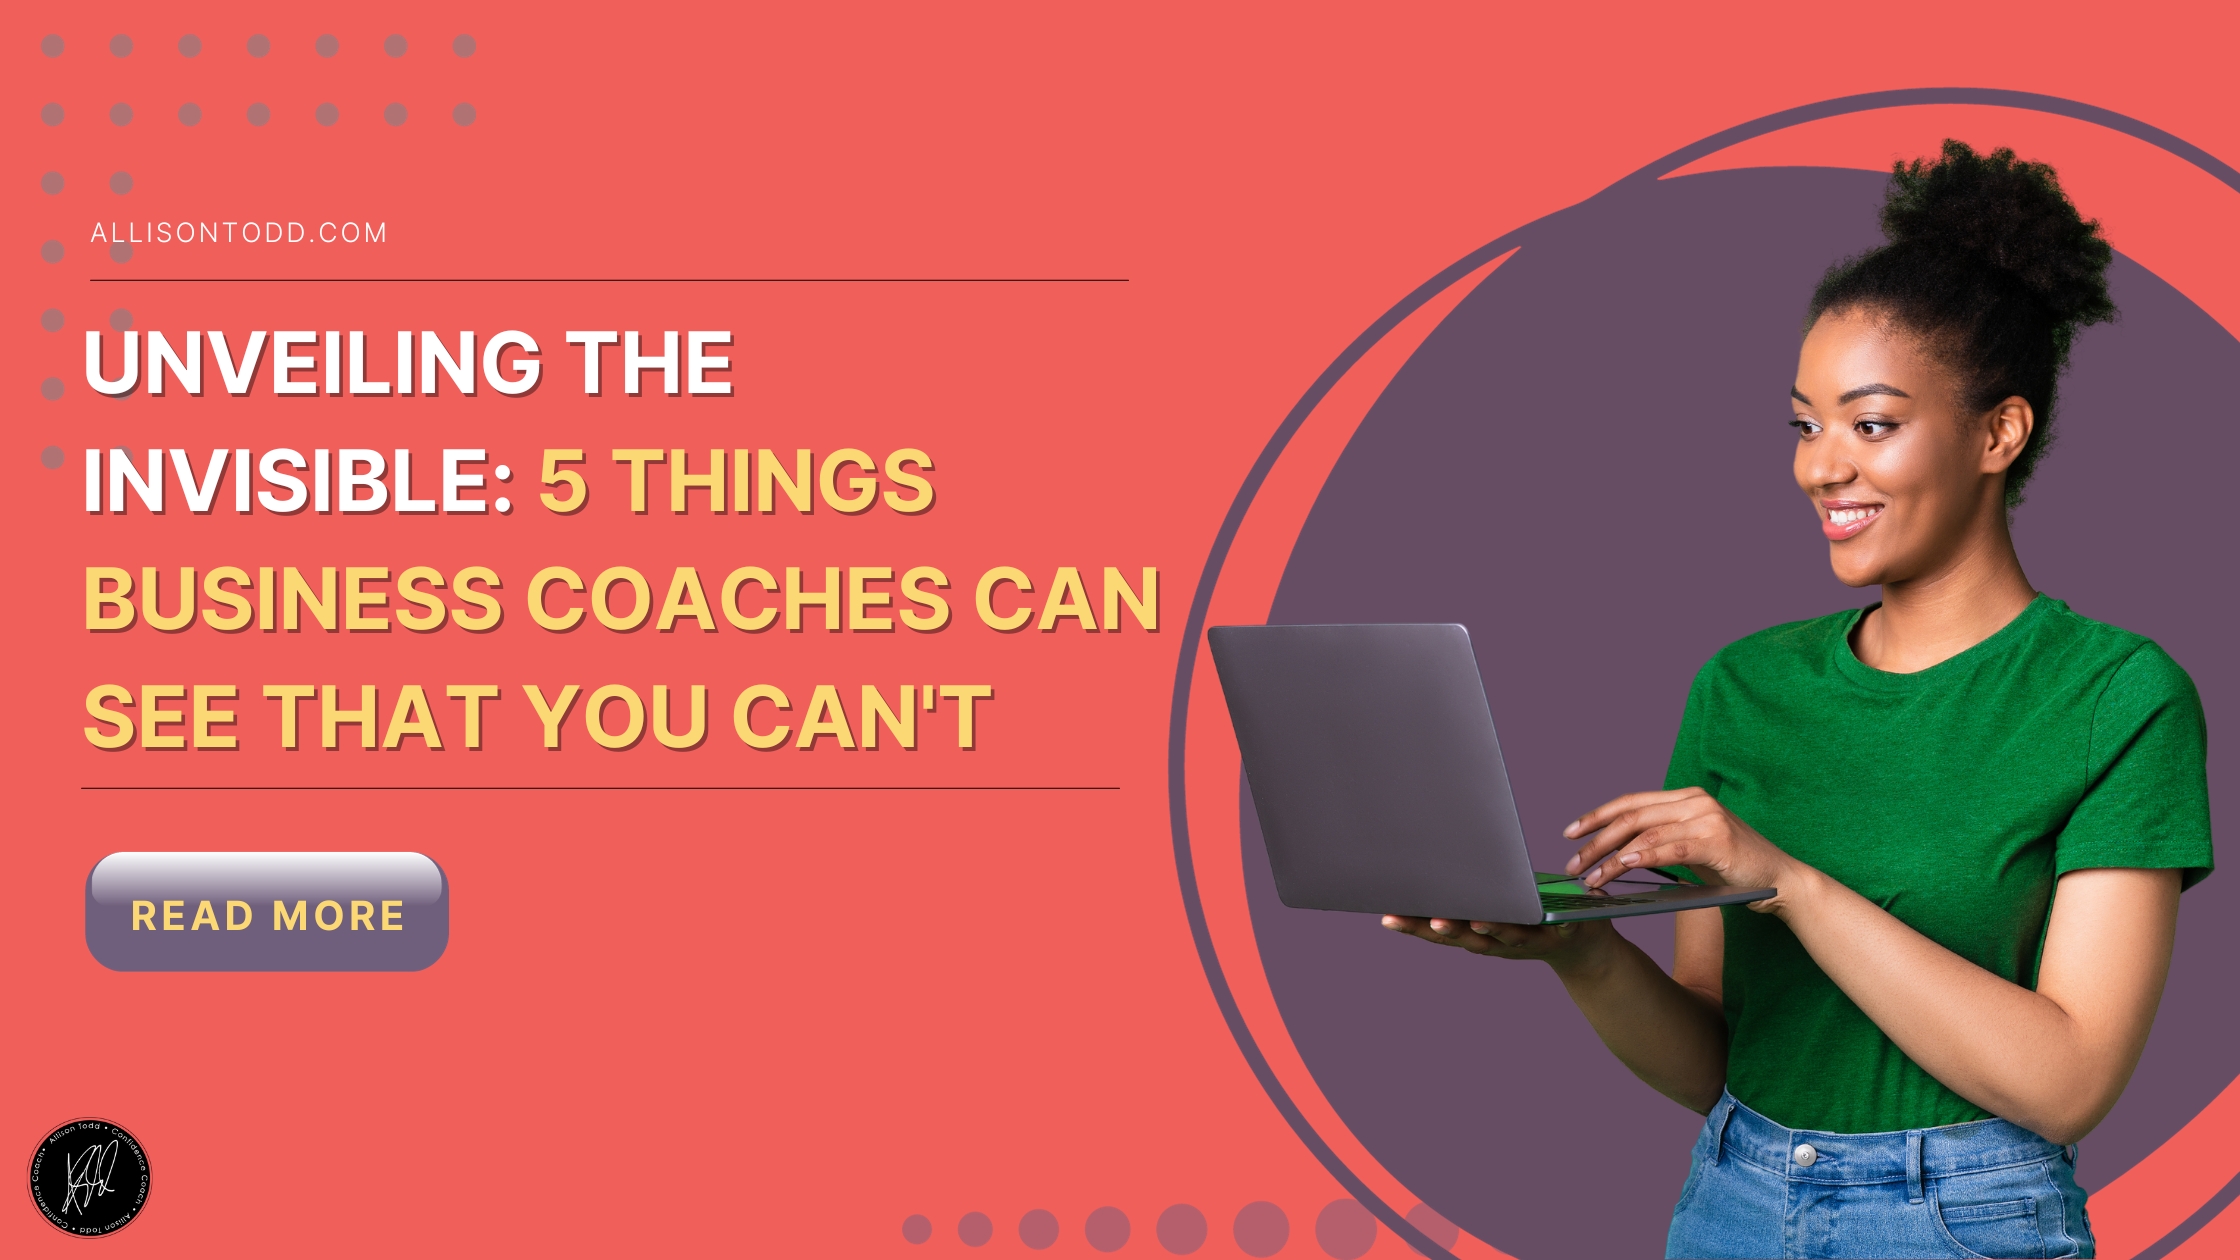 Unveiling the Invisible: 5 Things Business Coaches Can See That You Can't